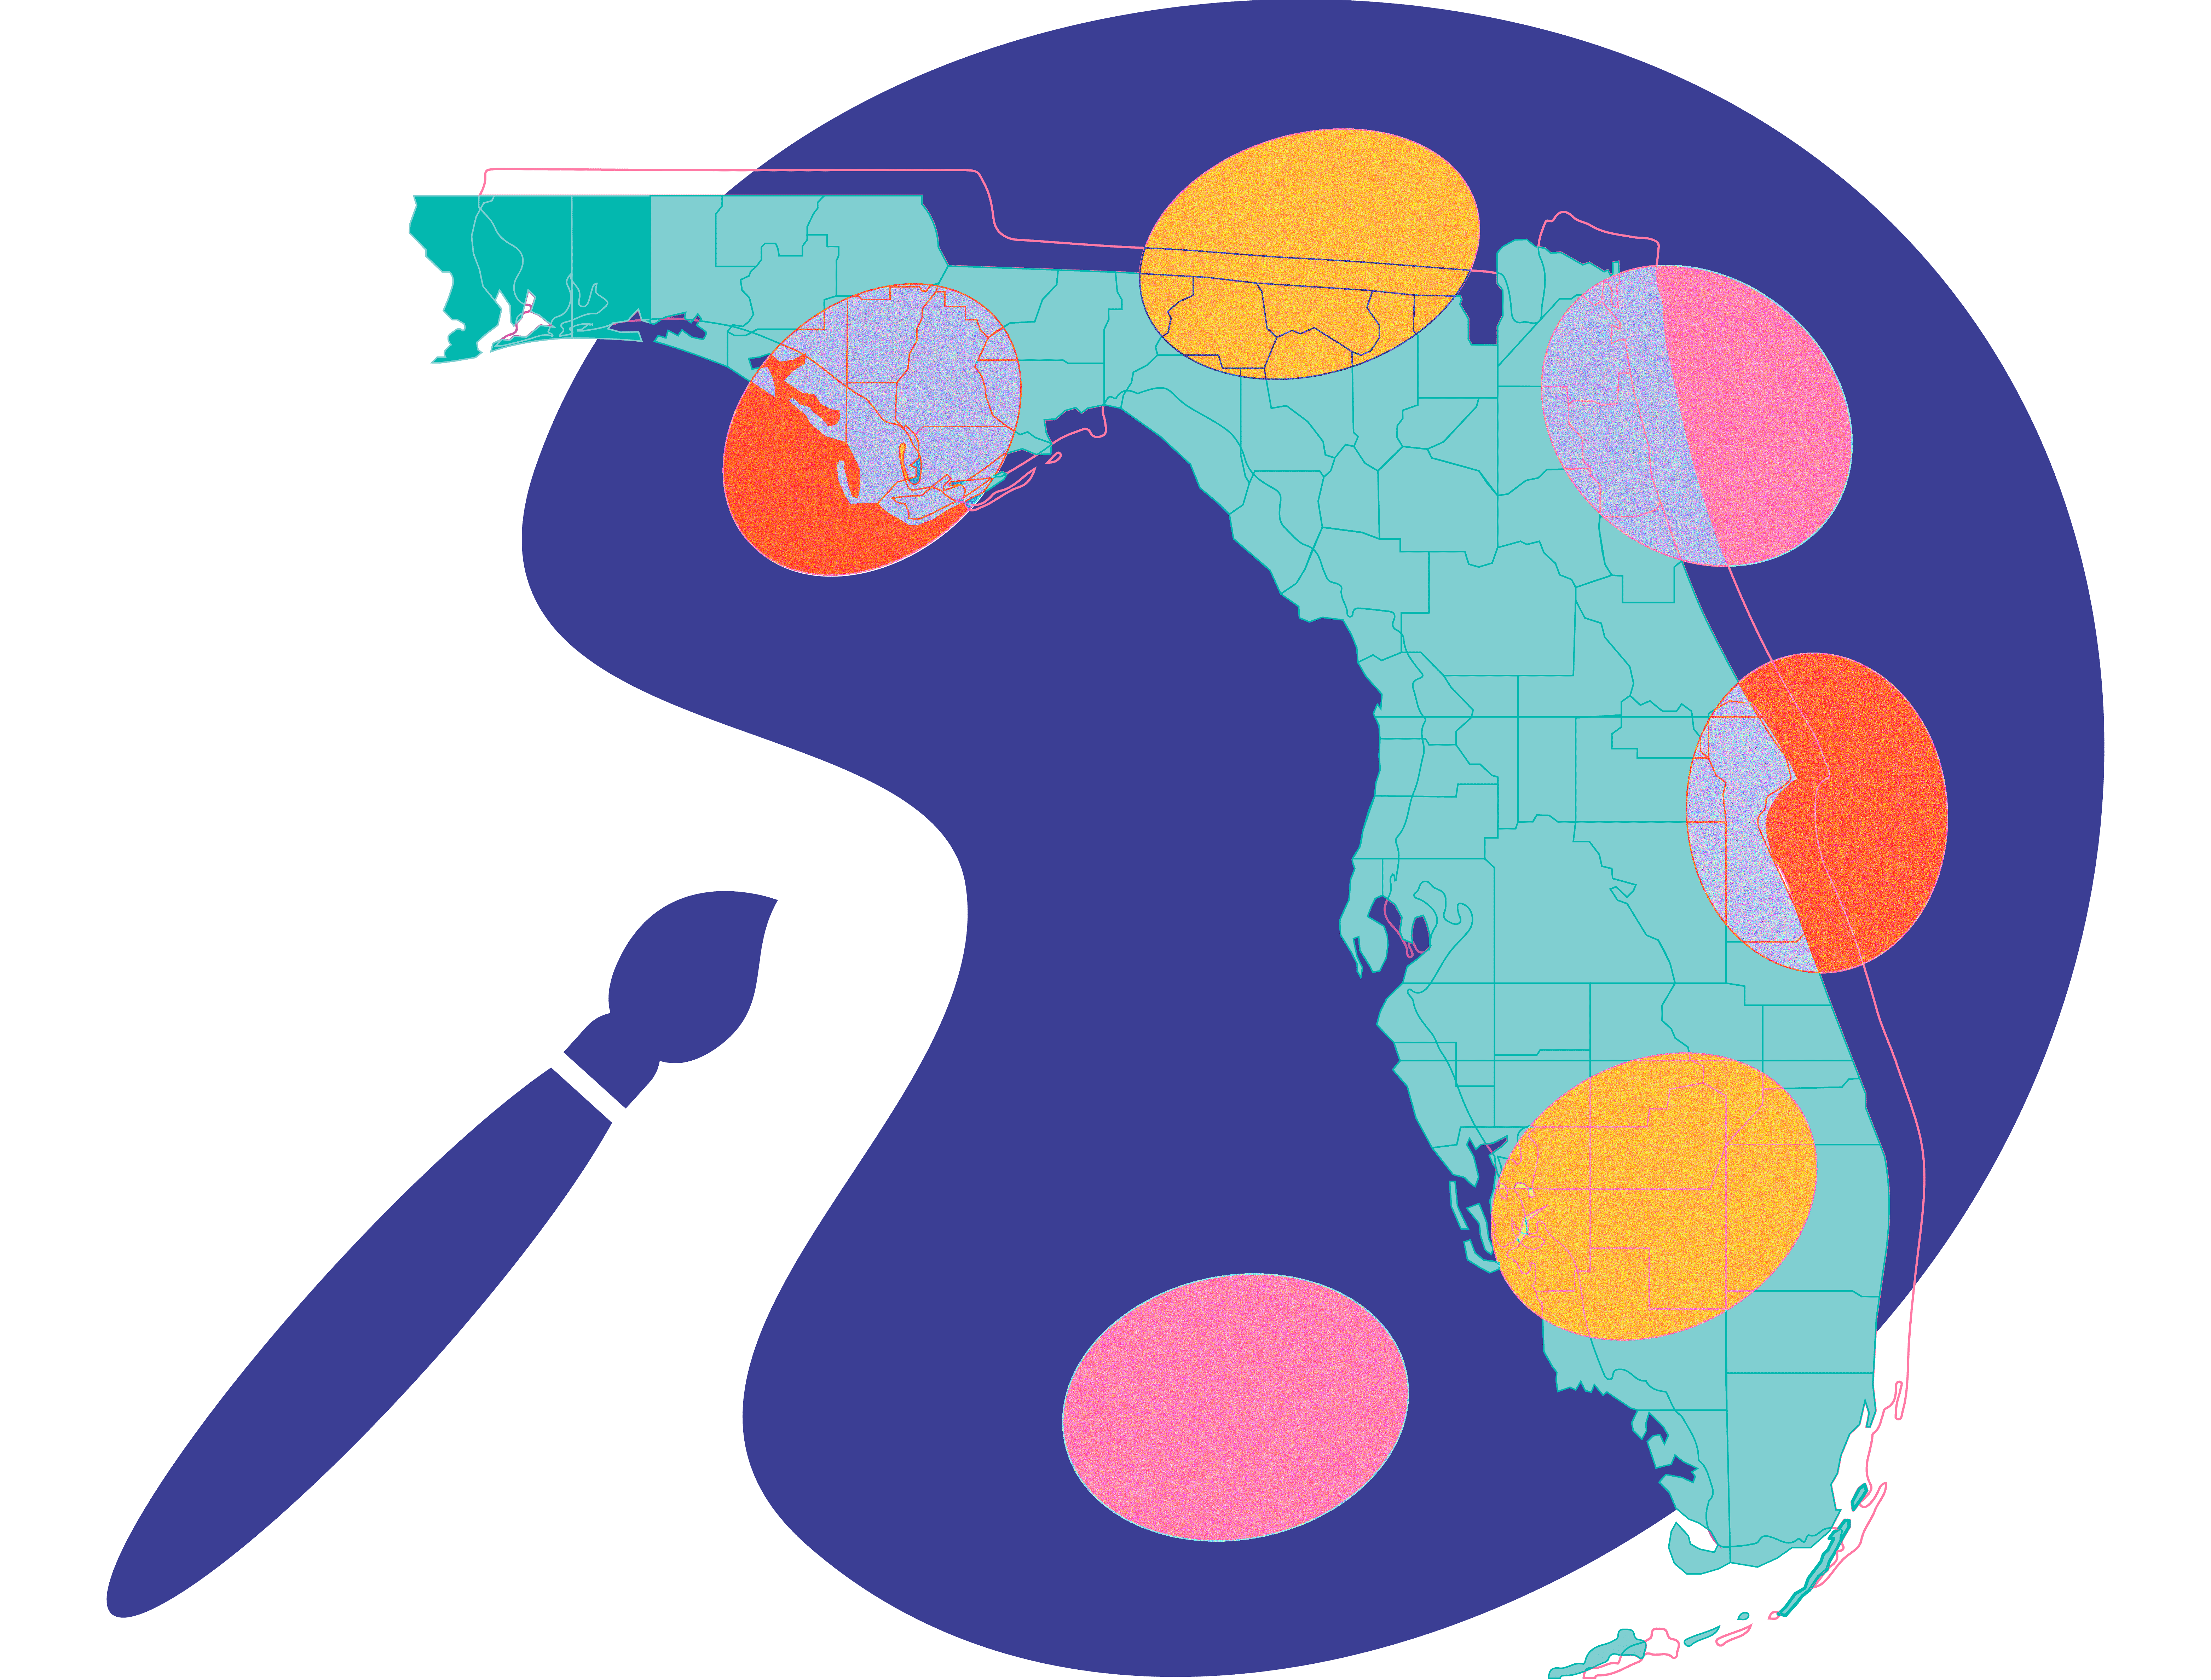 Art palette with the shape of Florida in the middle